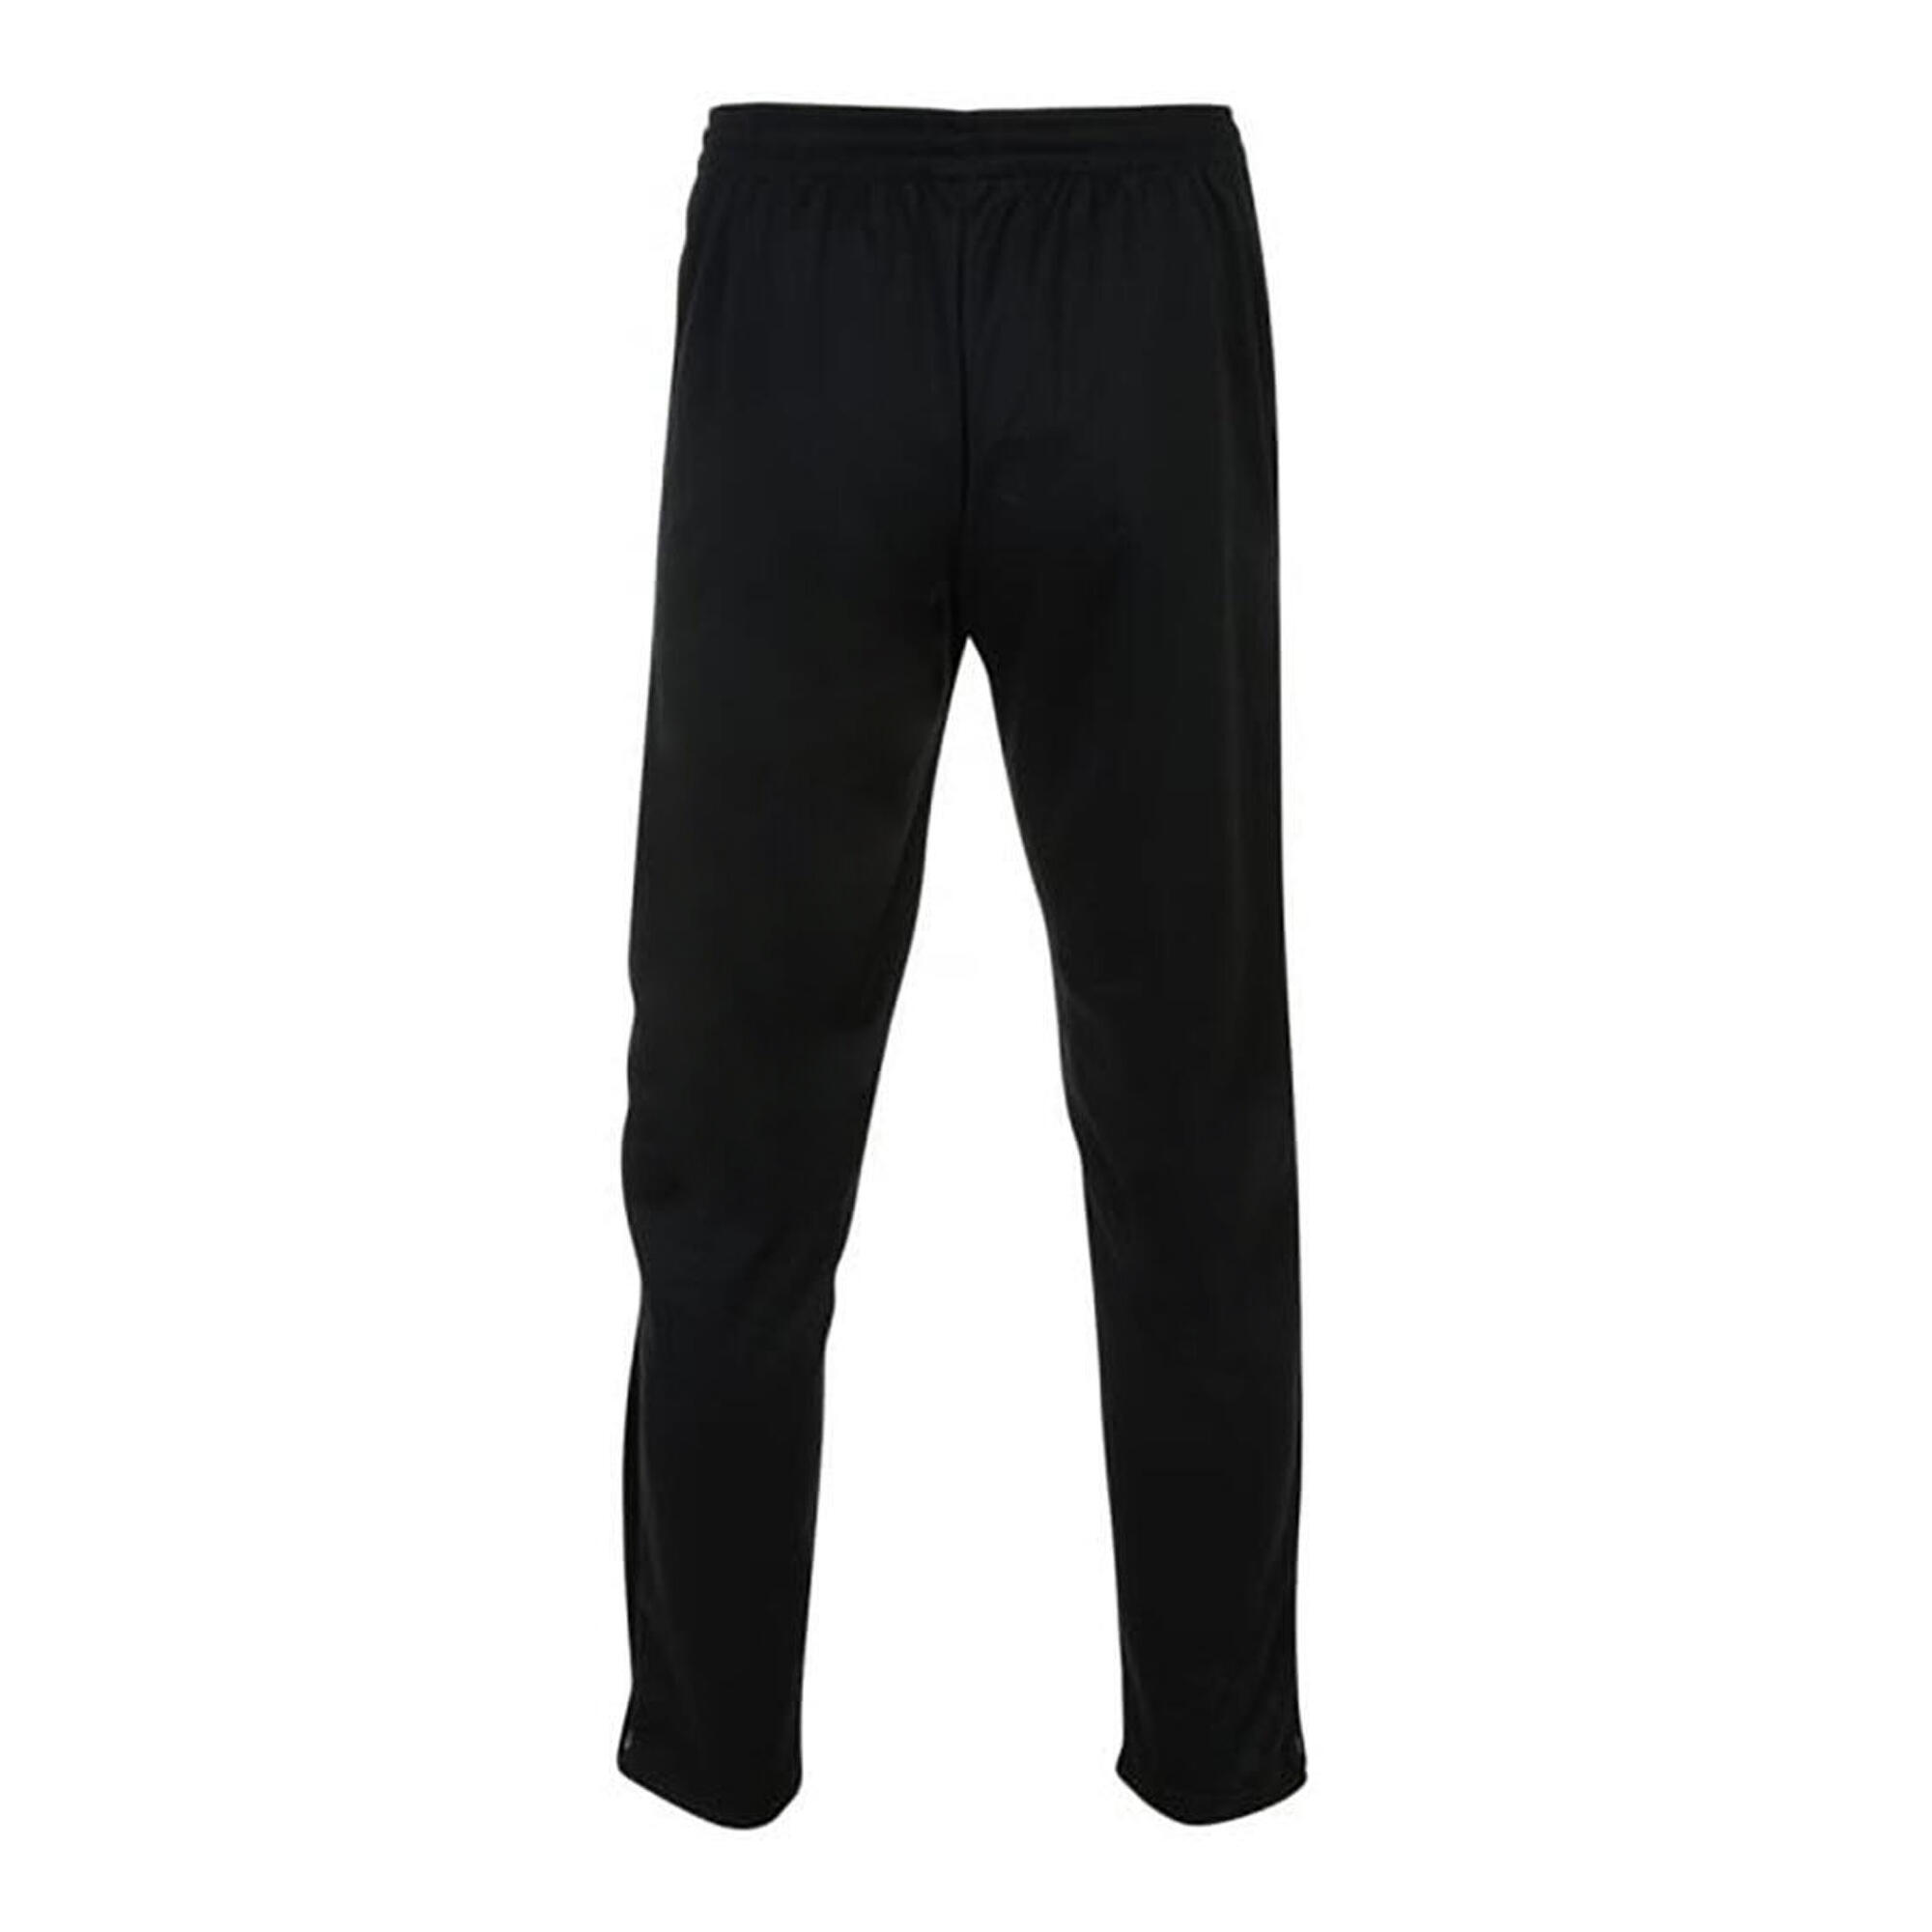 Unisex Adult Stretch Tapered Tracksuit Bottoms (Black) 2/2